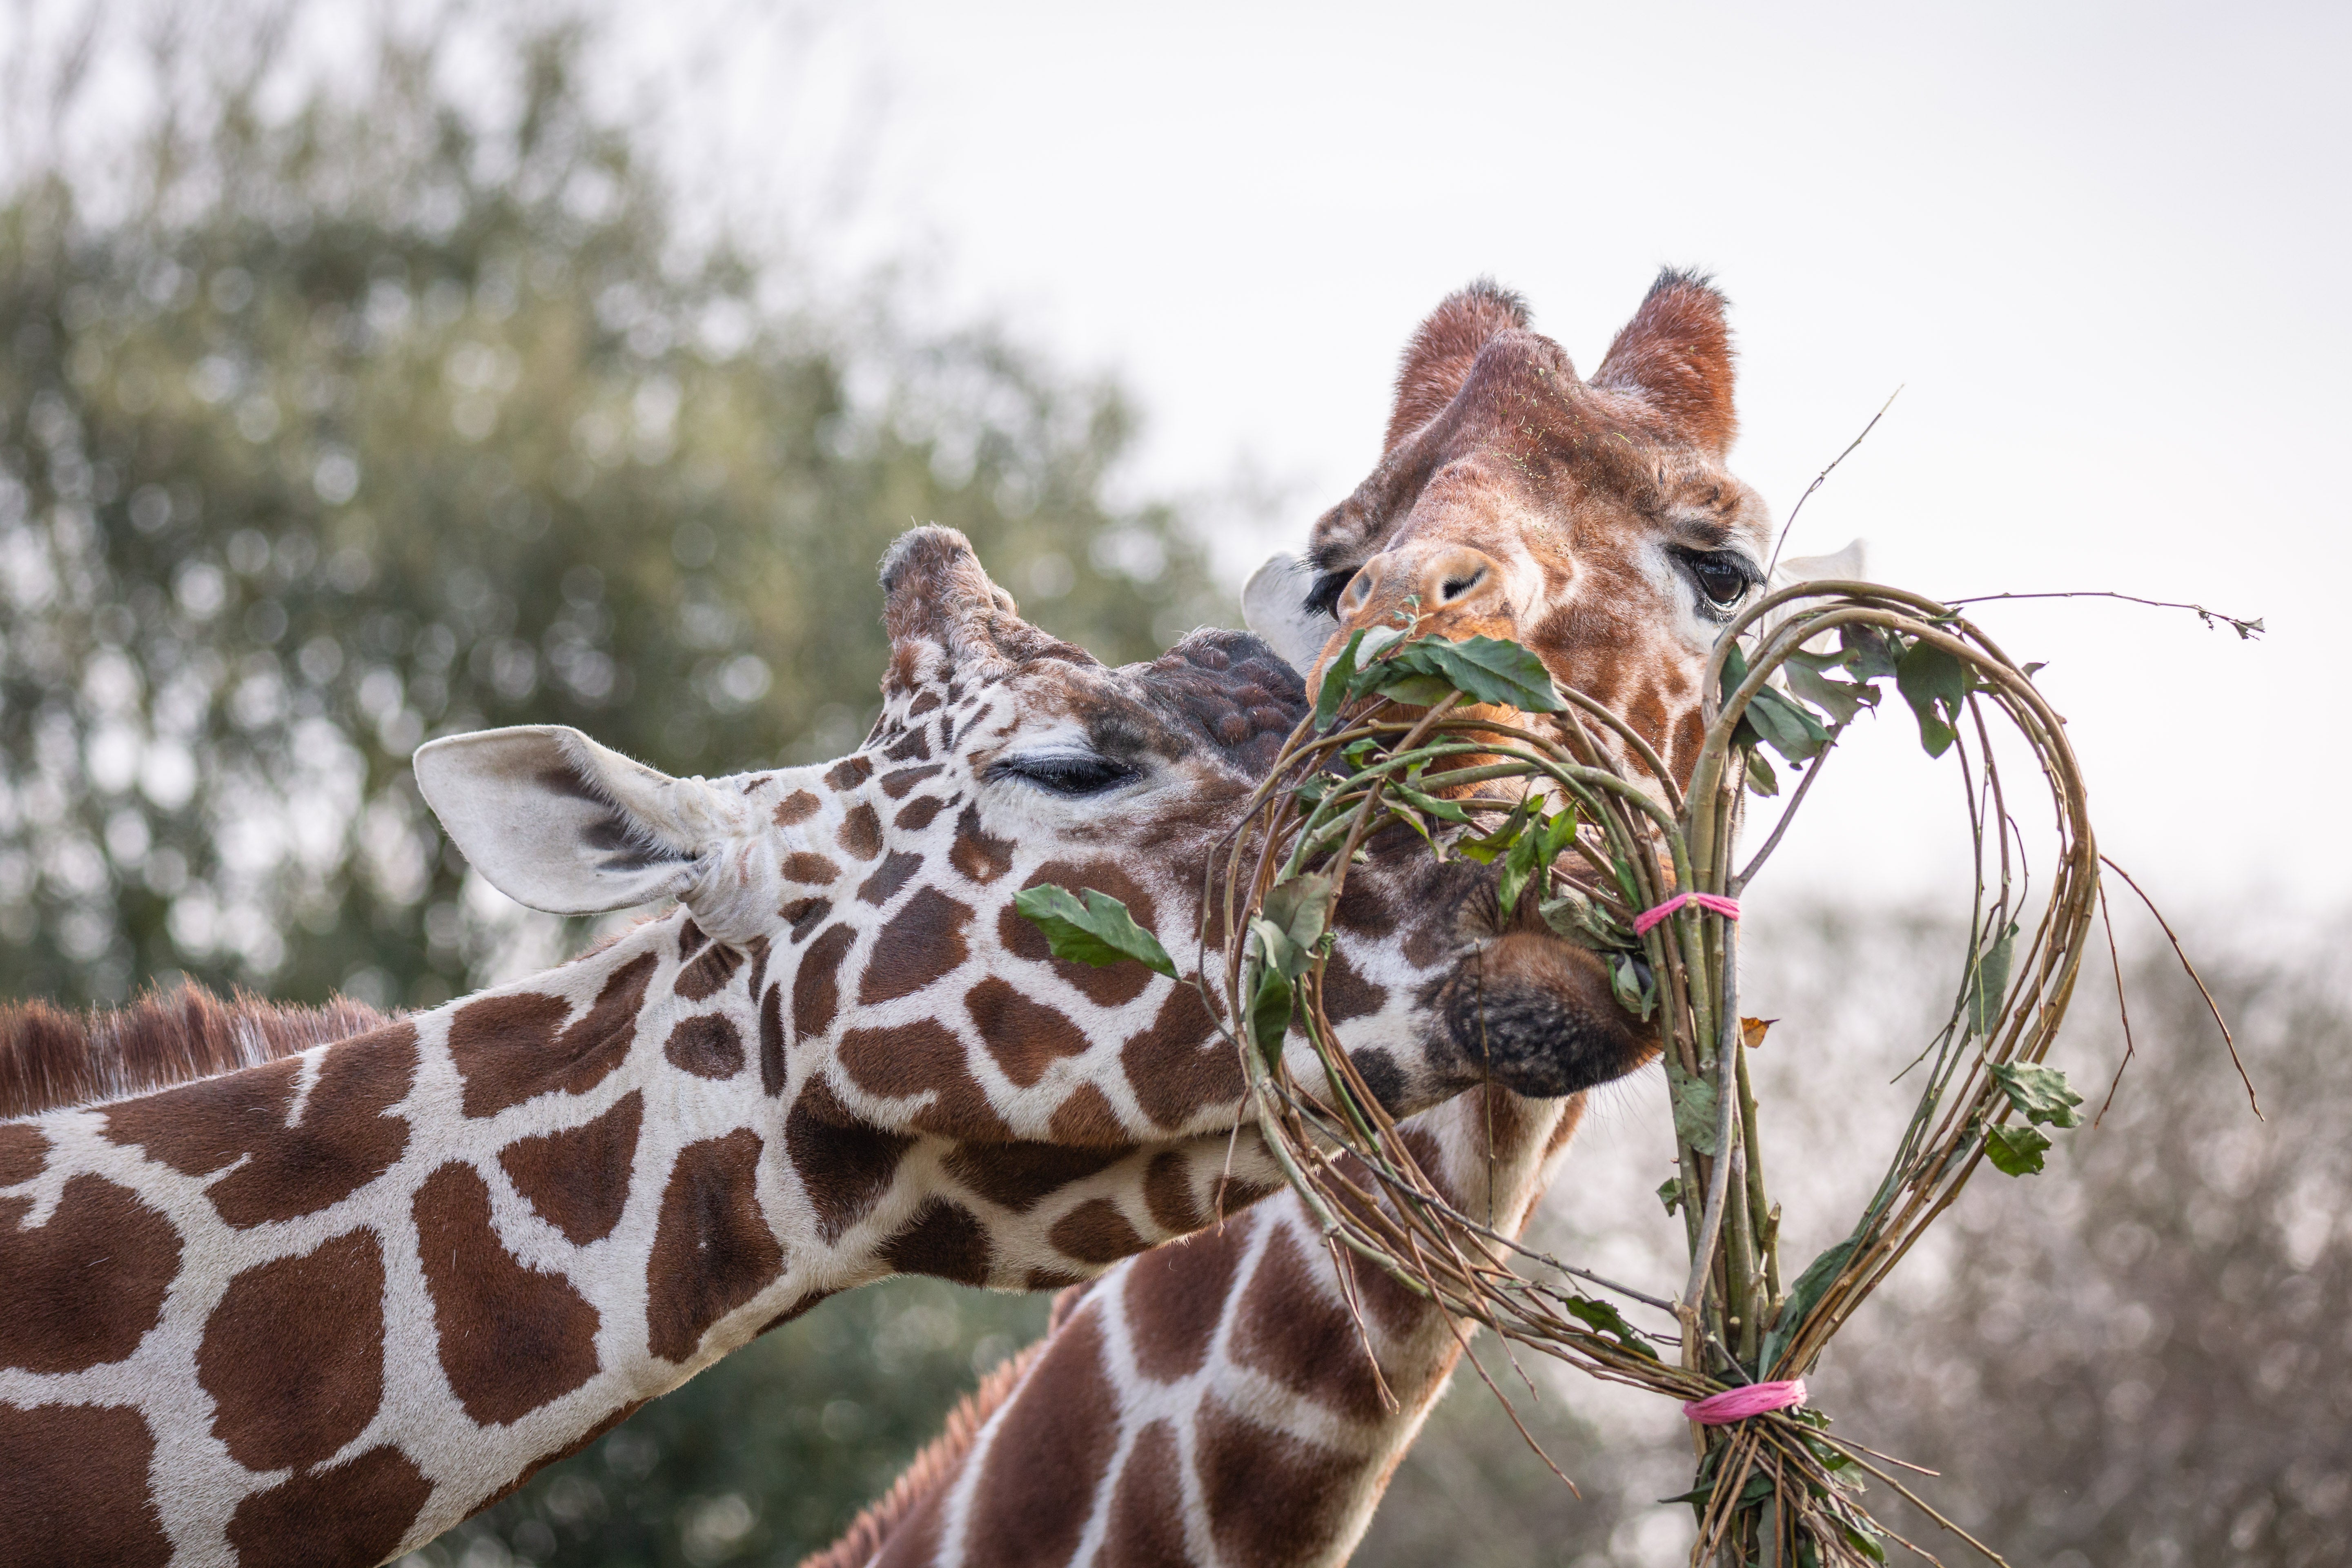 Giraffes were given their favourite meal of willow and cotoneaster branches, woven together to form a romantic heart garland. (ZSL Whipsnade Zoo/PA)